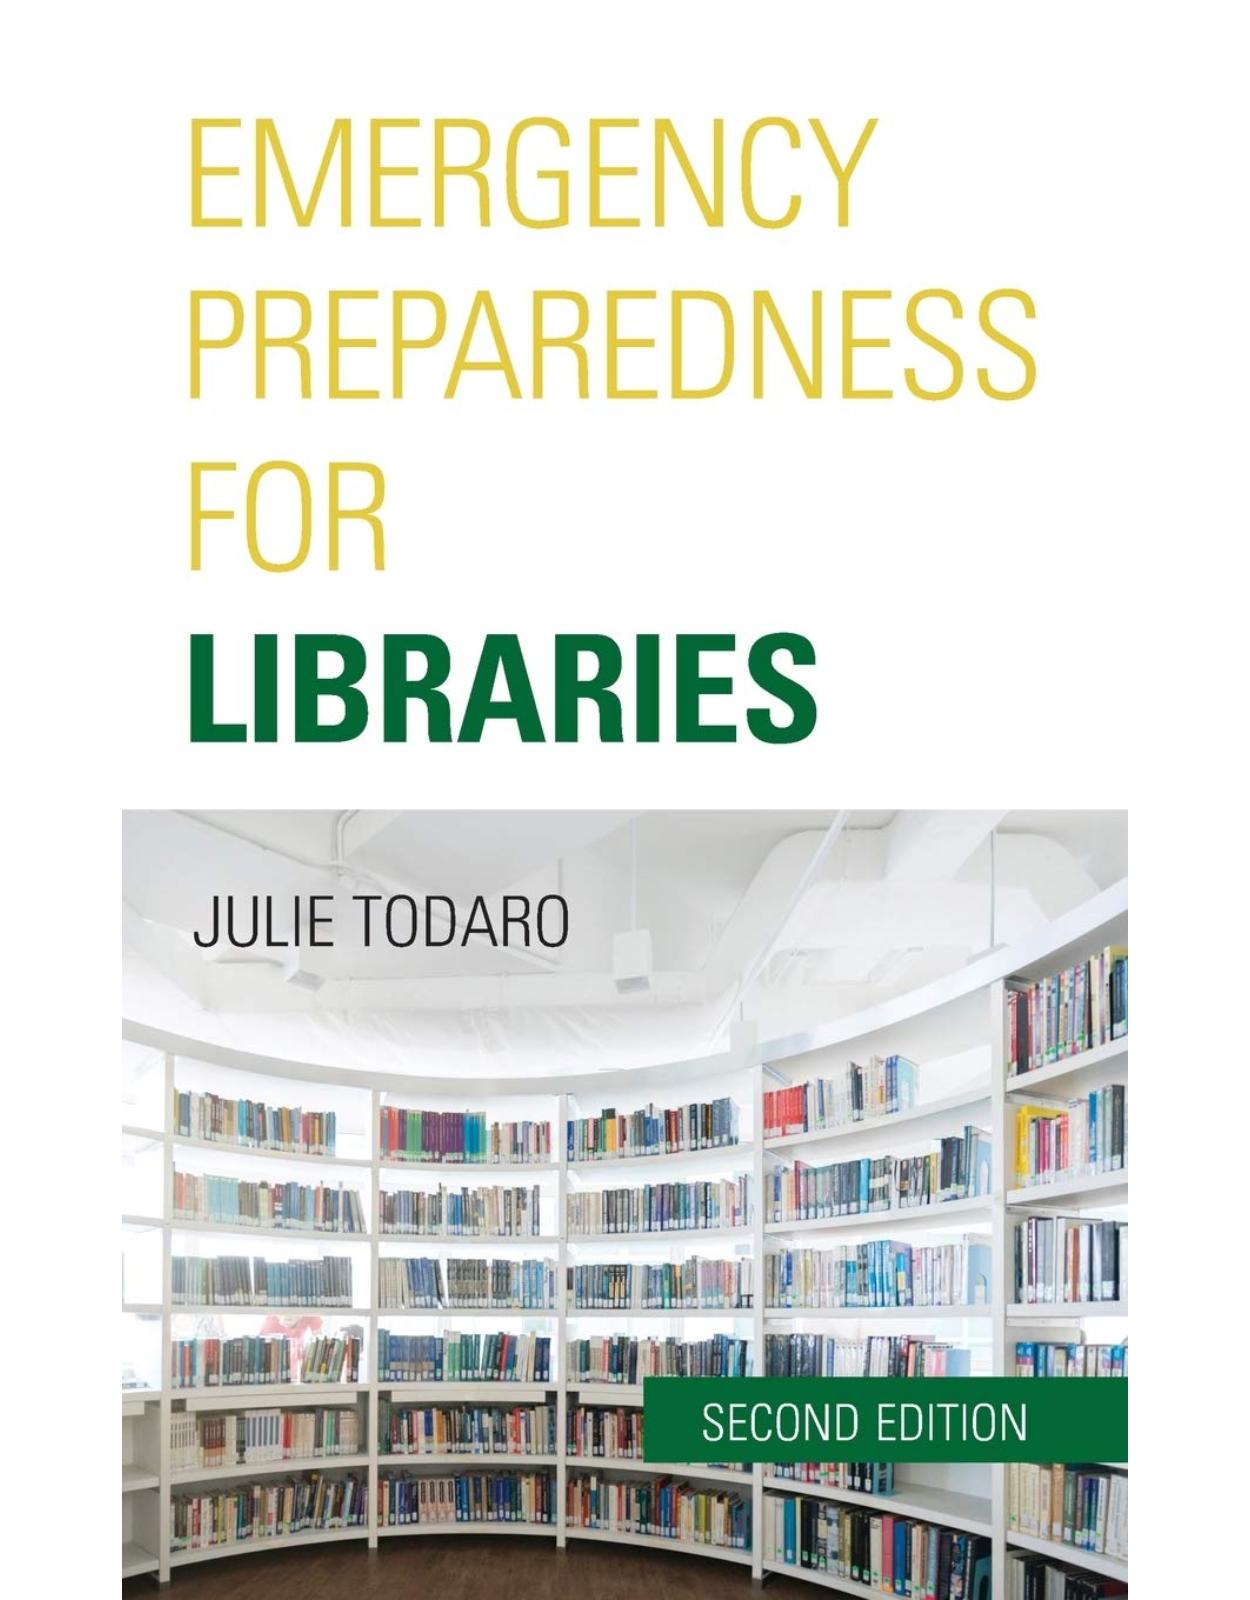 Emergency Preparedness for Libraries, Second Edition